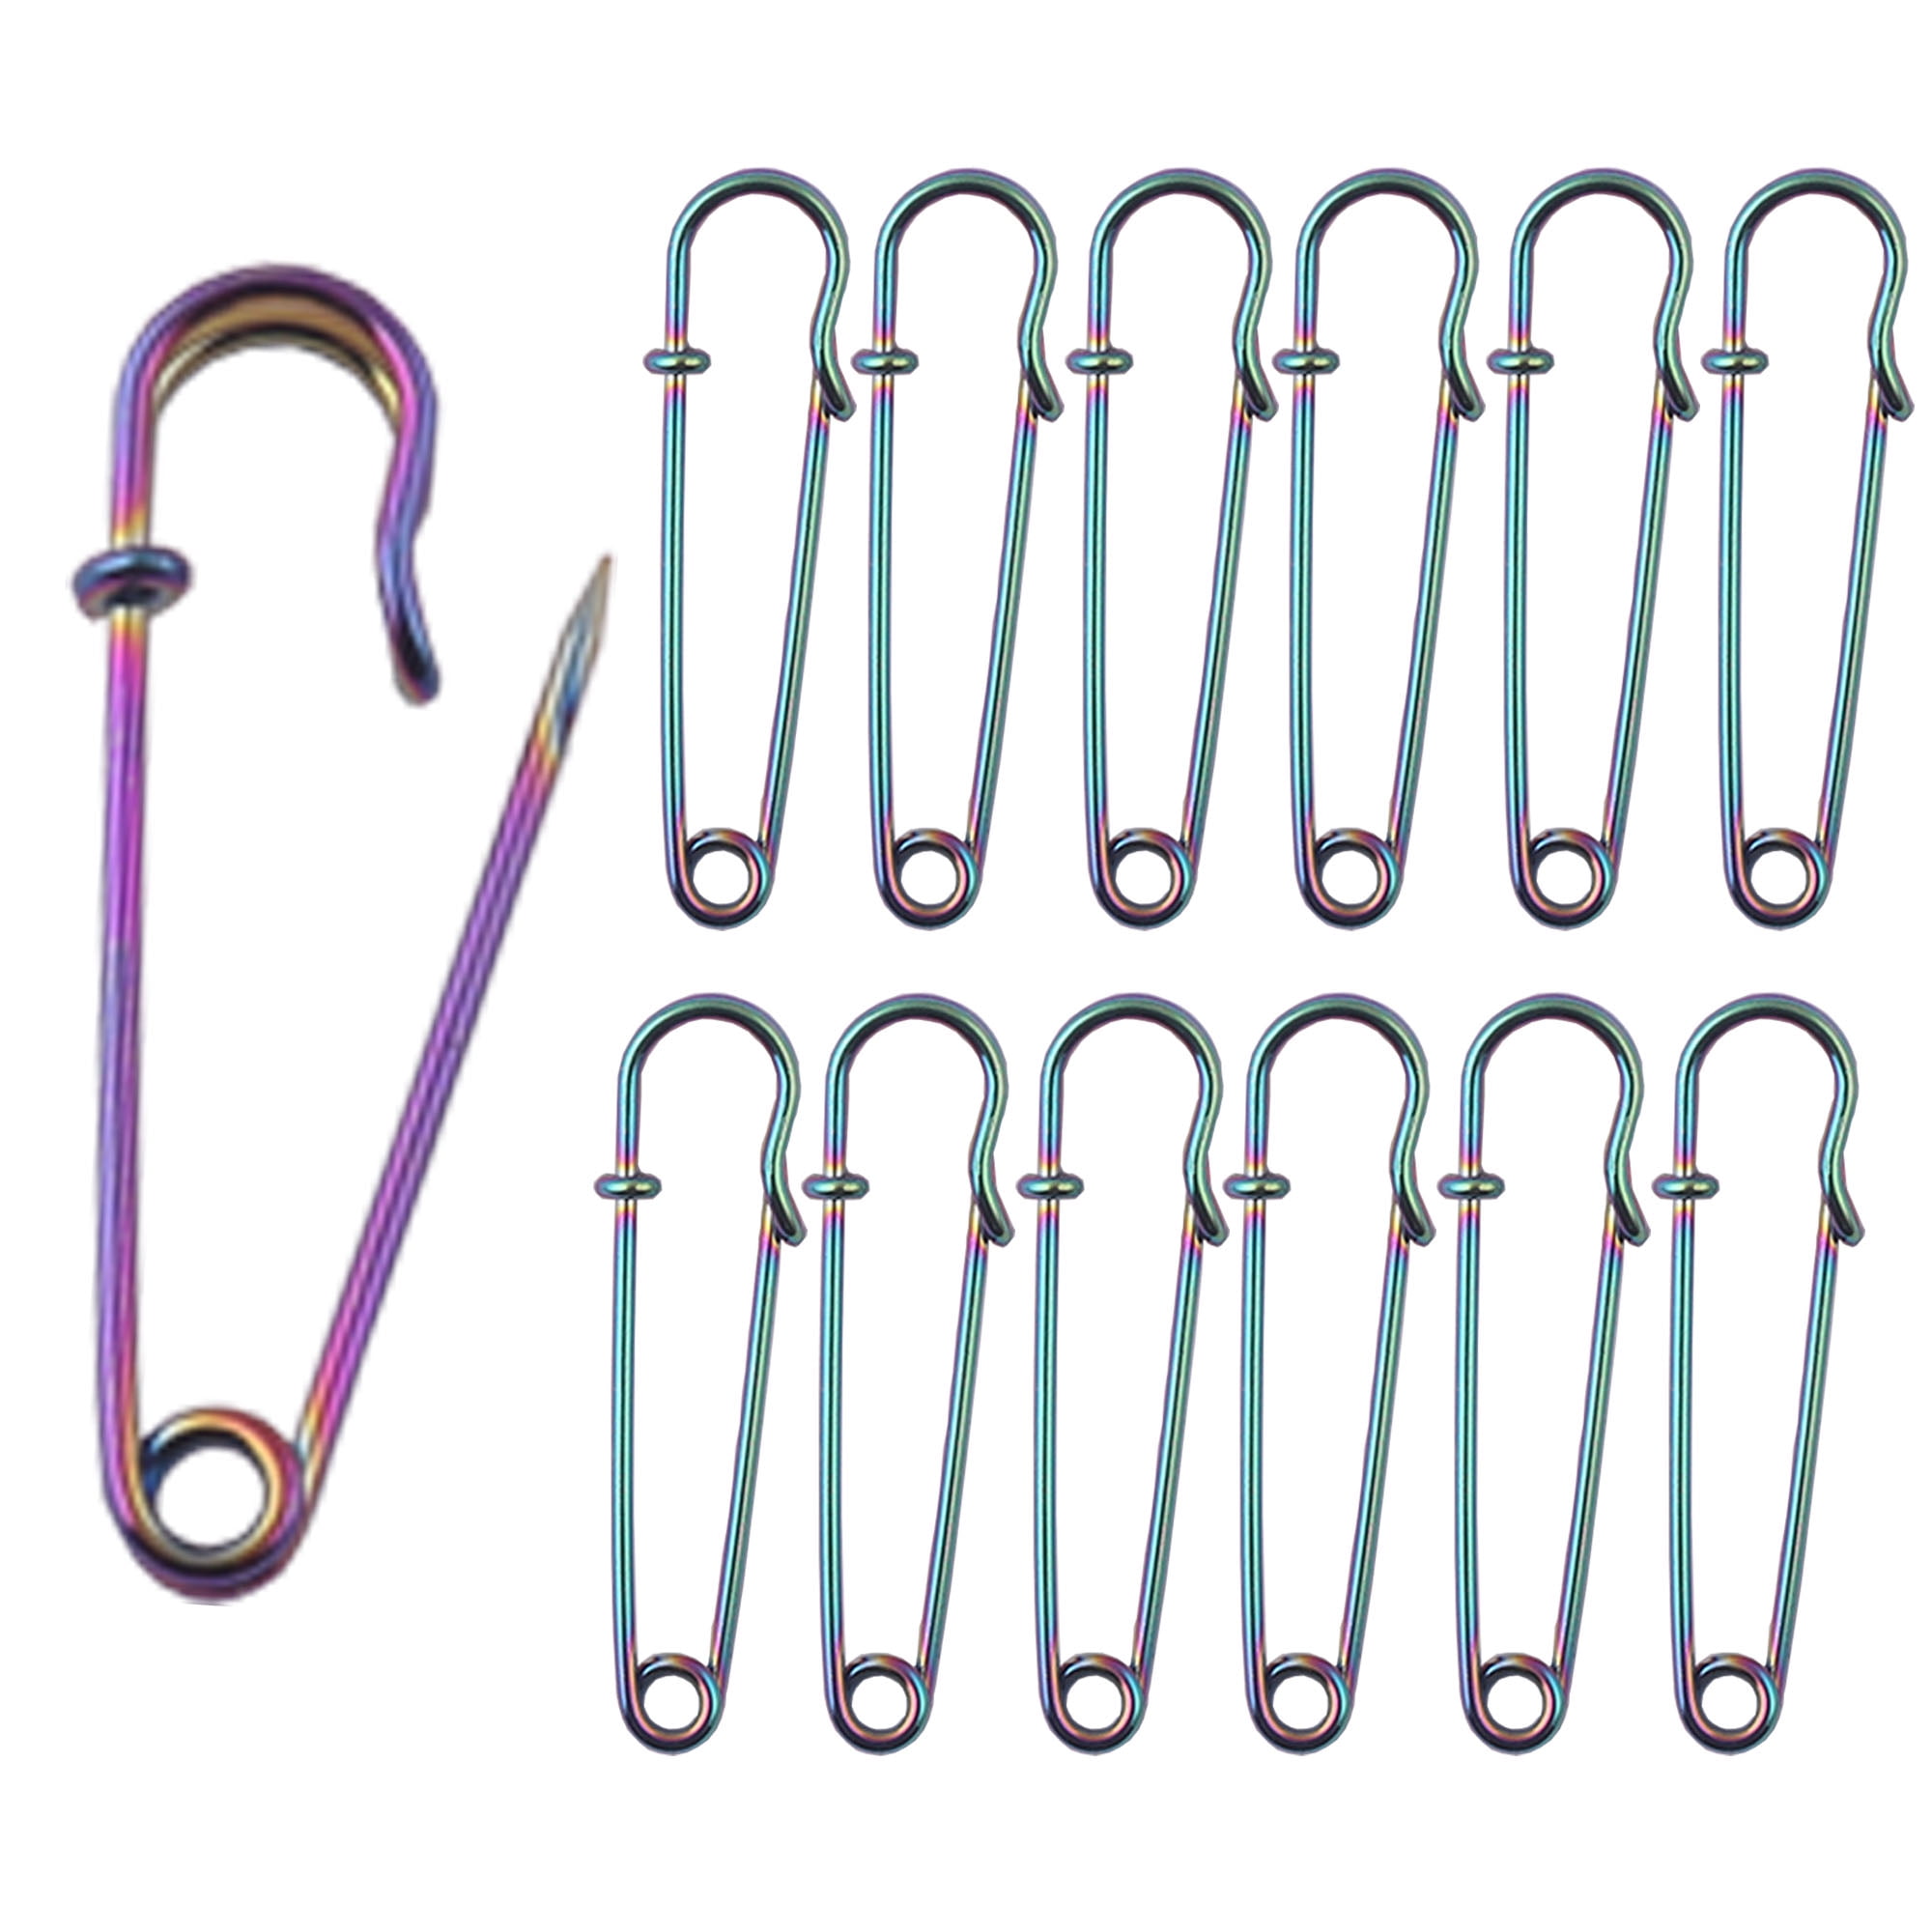 Large Safety Pins Large Safety Pins Heavy Duty Safety Pins for Clothes  Blanket Safety Pins 12